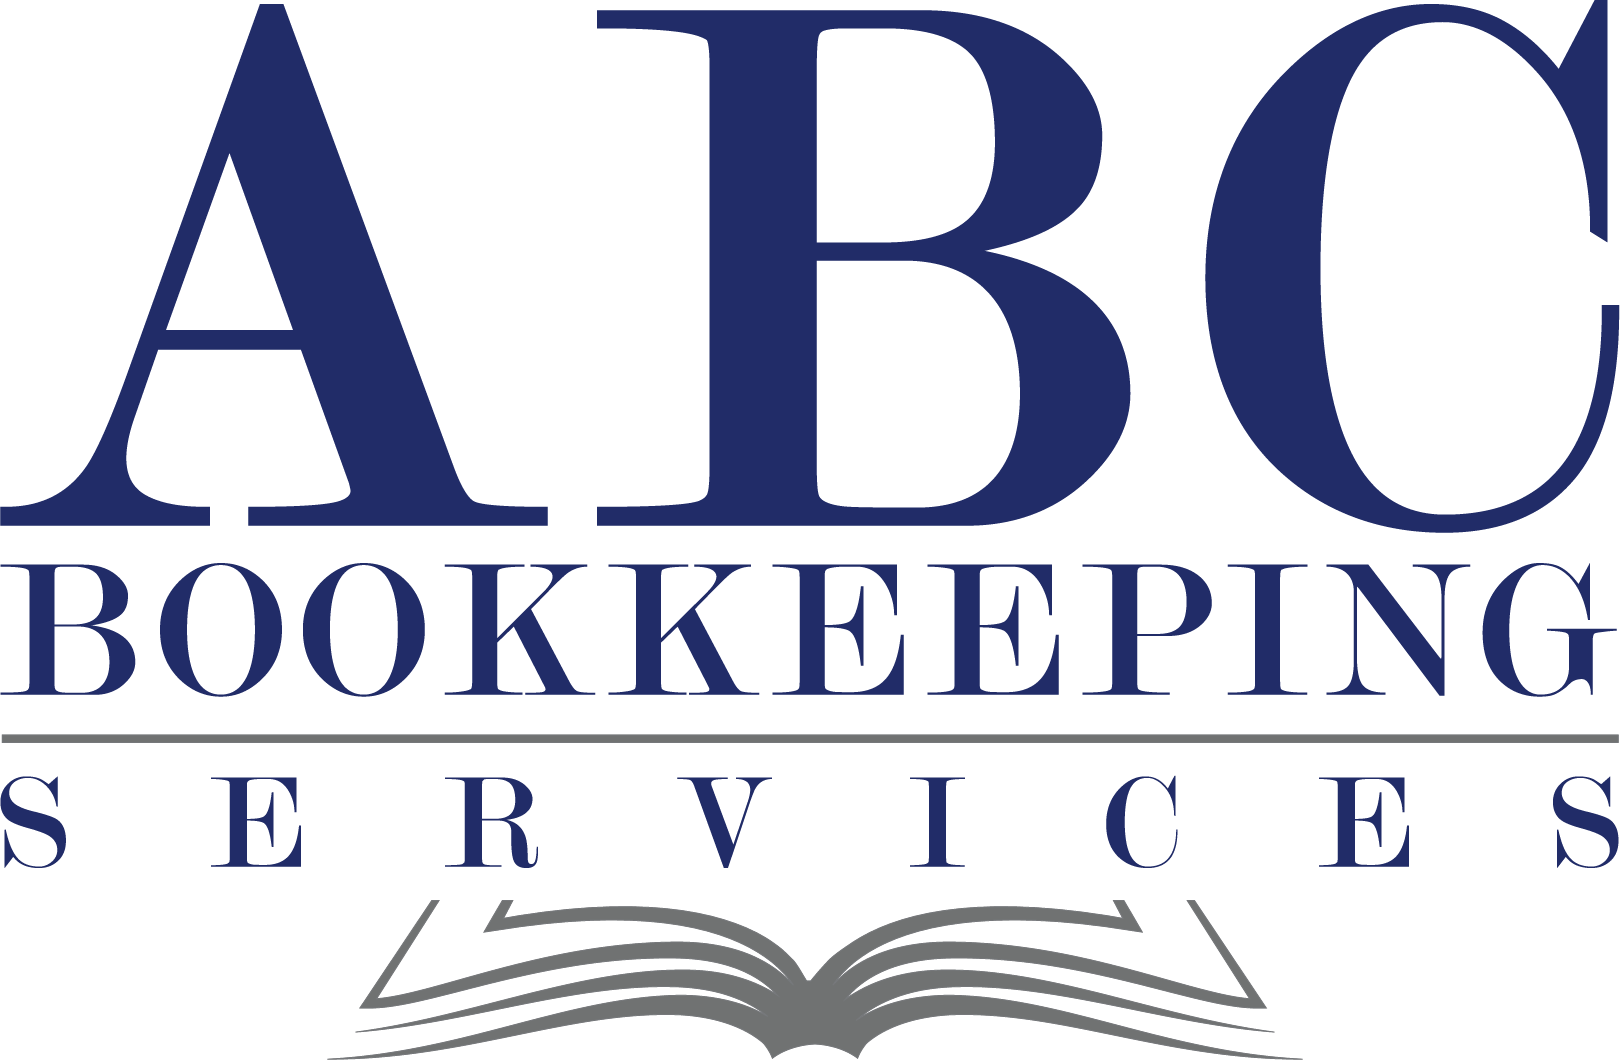 ABC Bookkeeping Services Logo